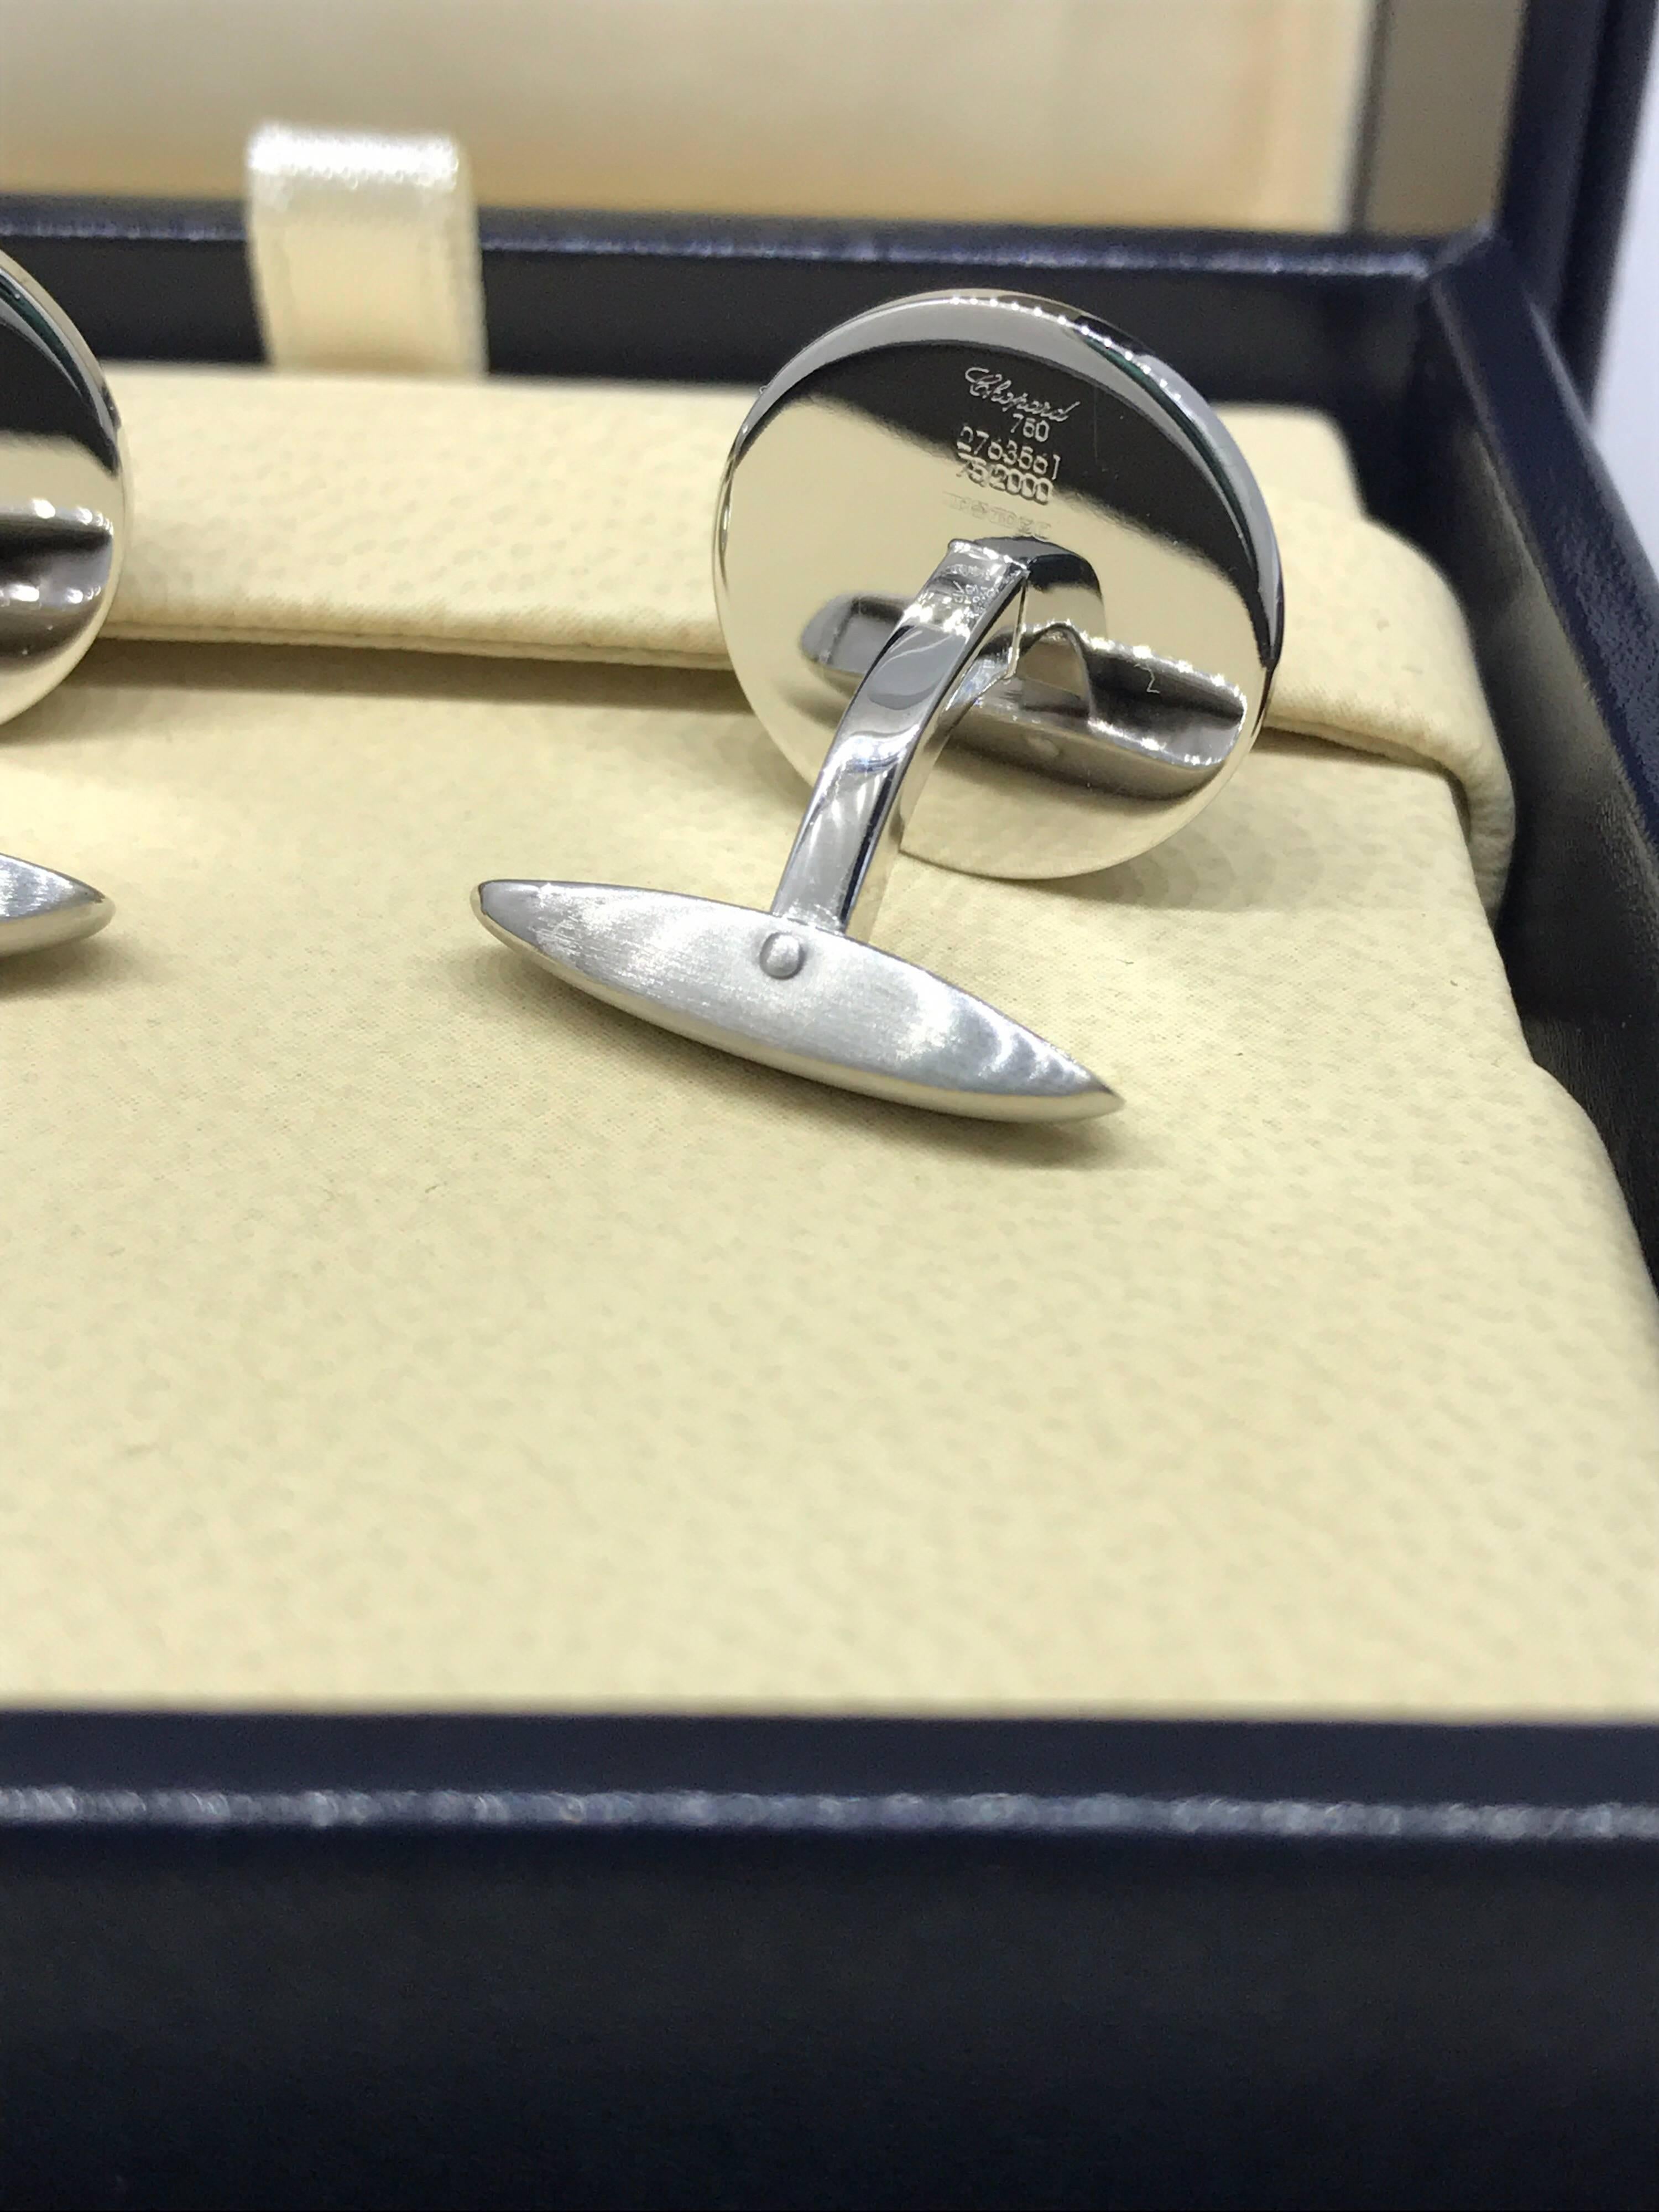 Chopard L.U.C. Men's Cufflinks

Model Number: 75/2000-1001

100% Authentic

Brand New

Comes with original Chopard box, certificate of authenticity and warranty and jewels manual

18 Karat White Gold (19.40gr)

The Perfect Gift

